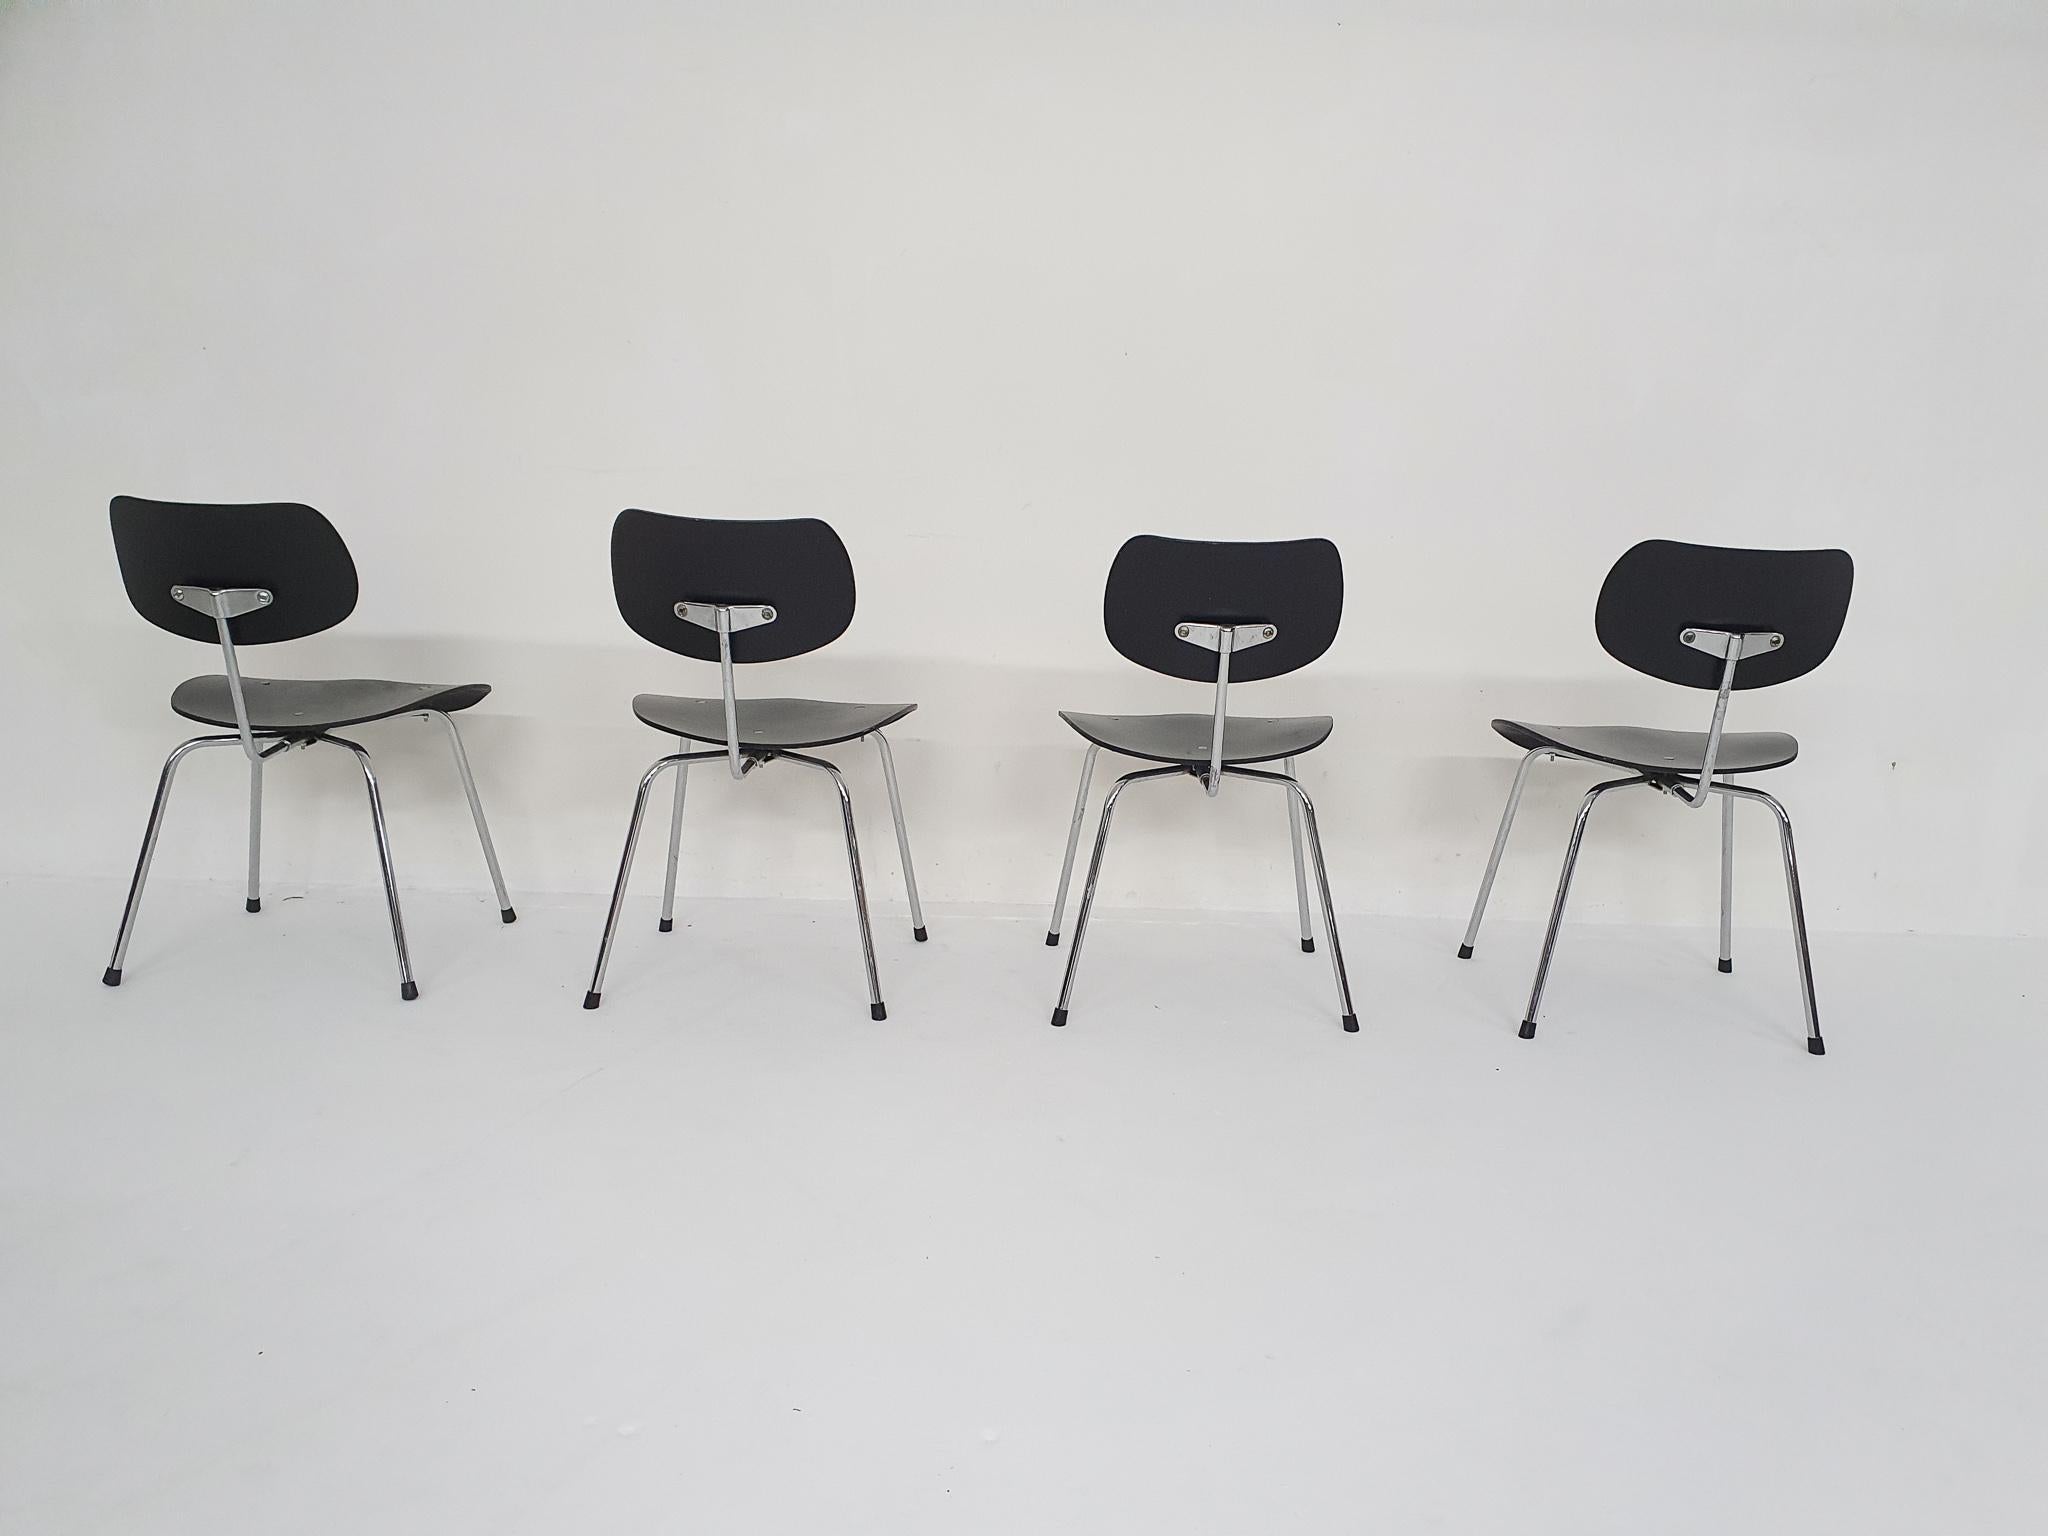 Late 20th Century Set of Four Egon Eiermann for Wilde Spieth SE68 Dining Chairs, Germany, 1993